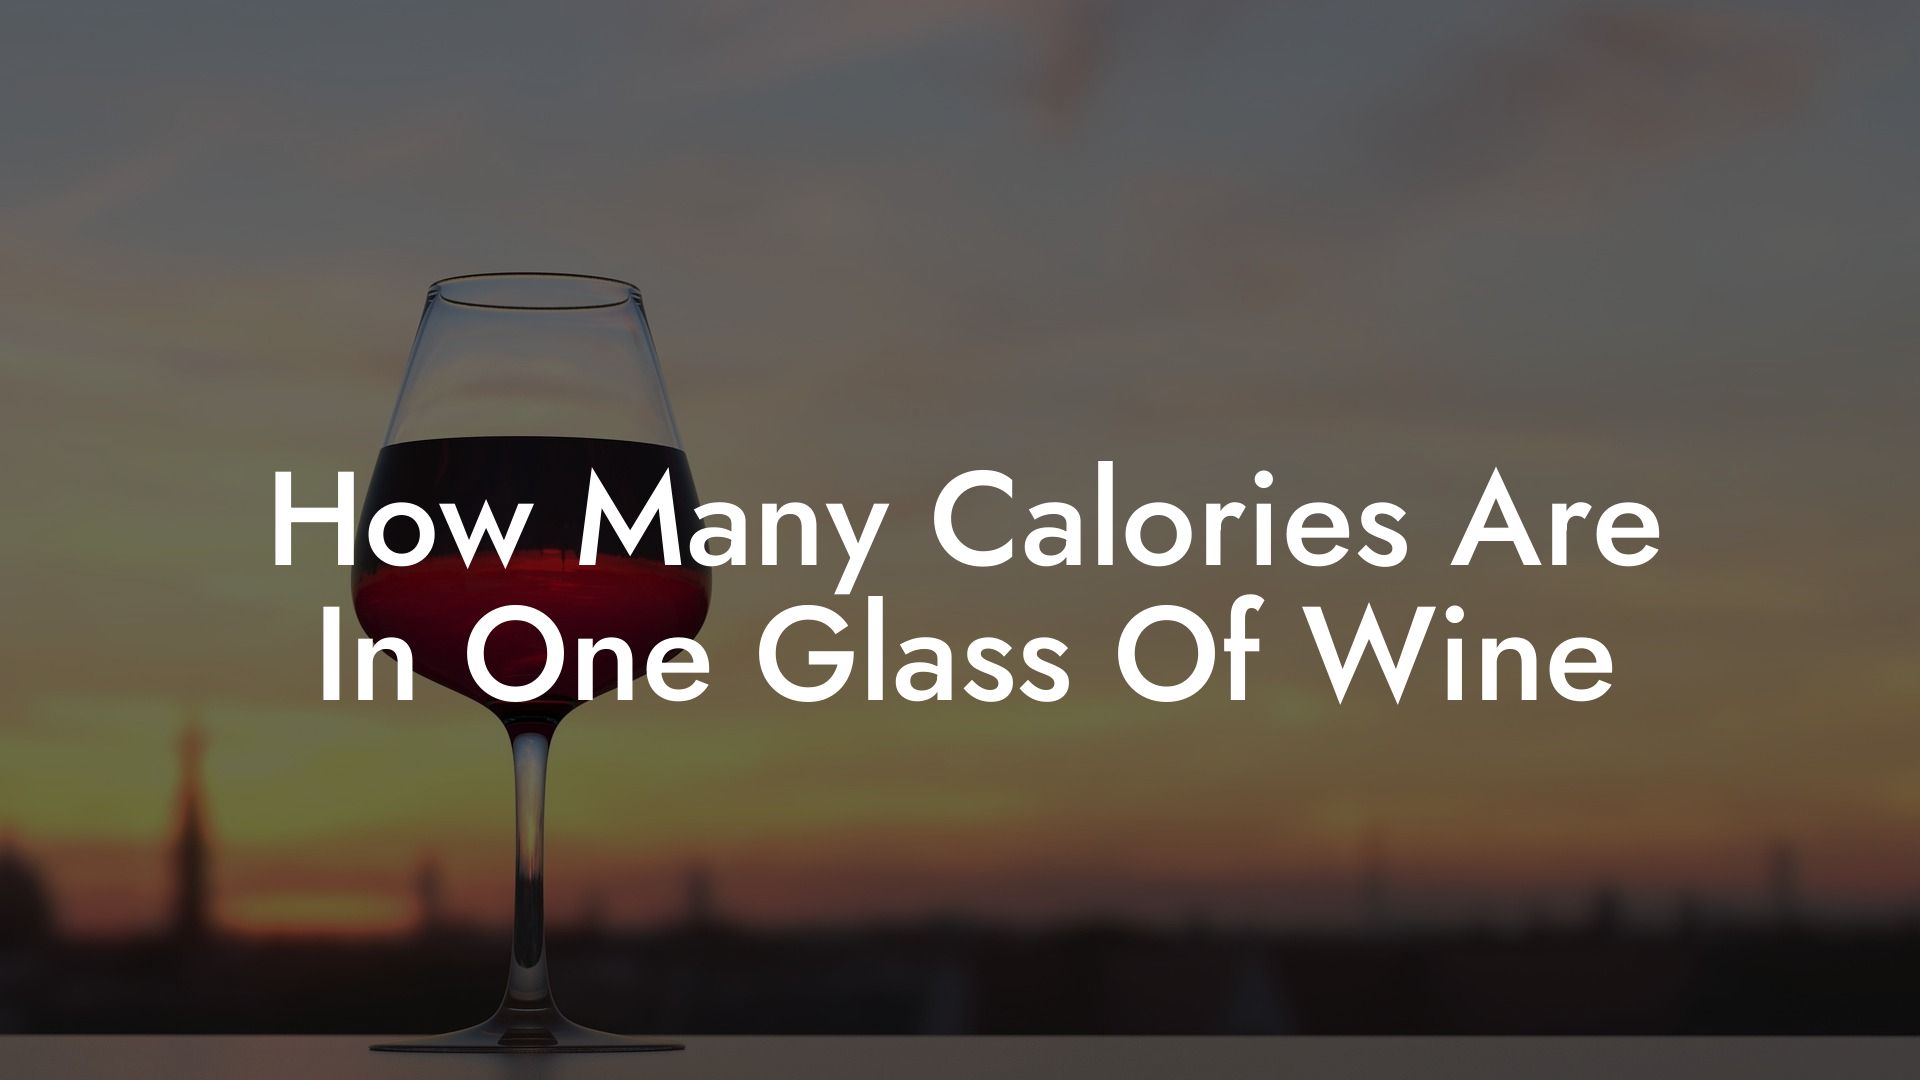 How Many Calories Are In One Glass Of Wine